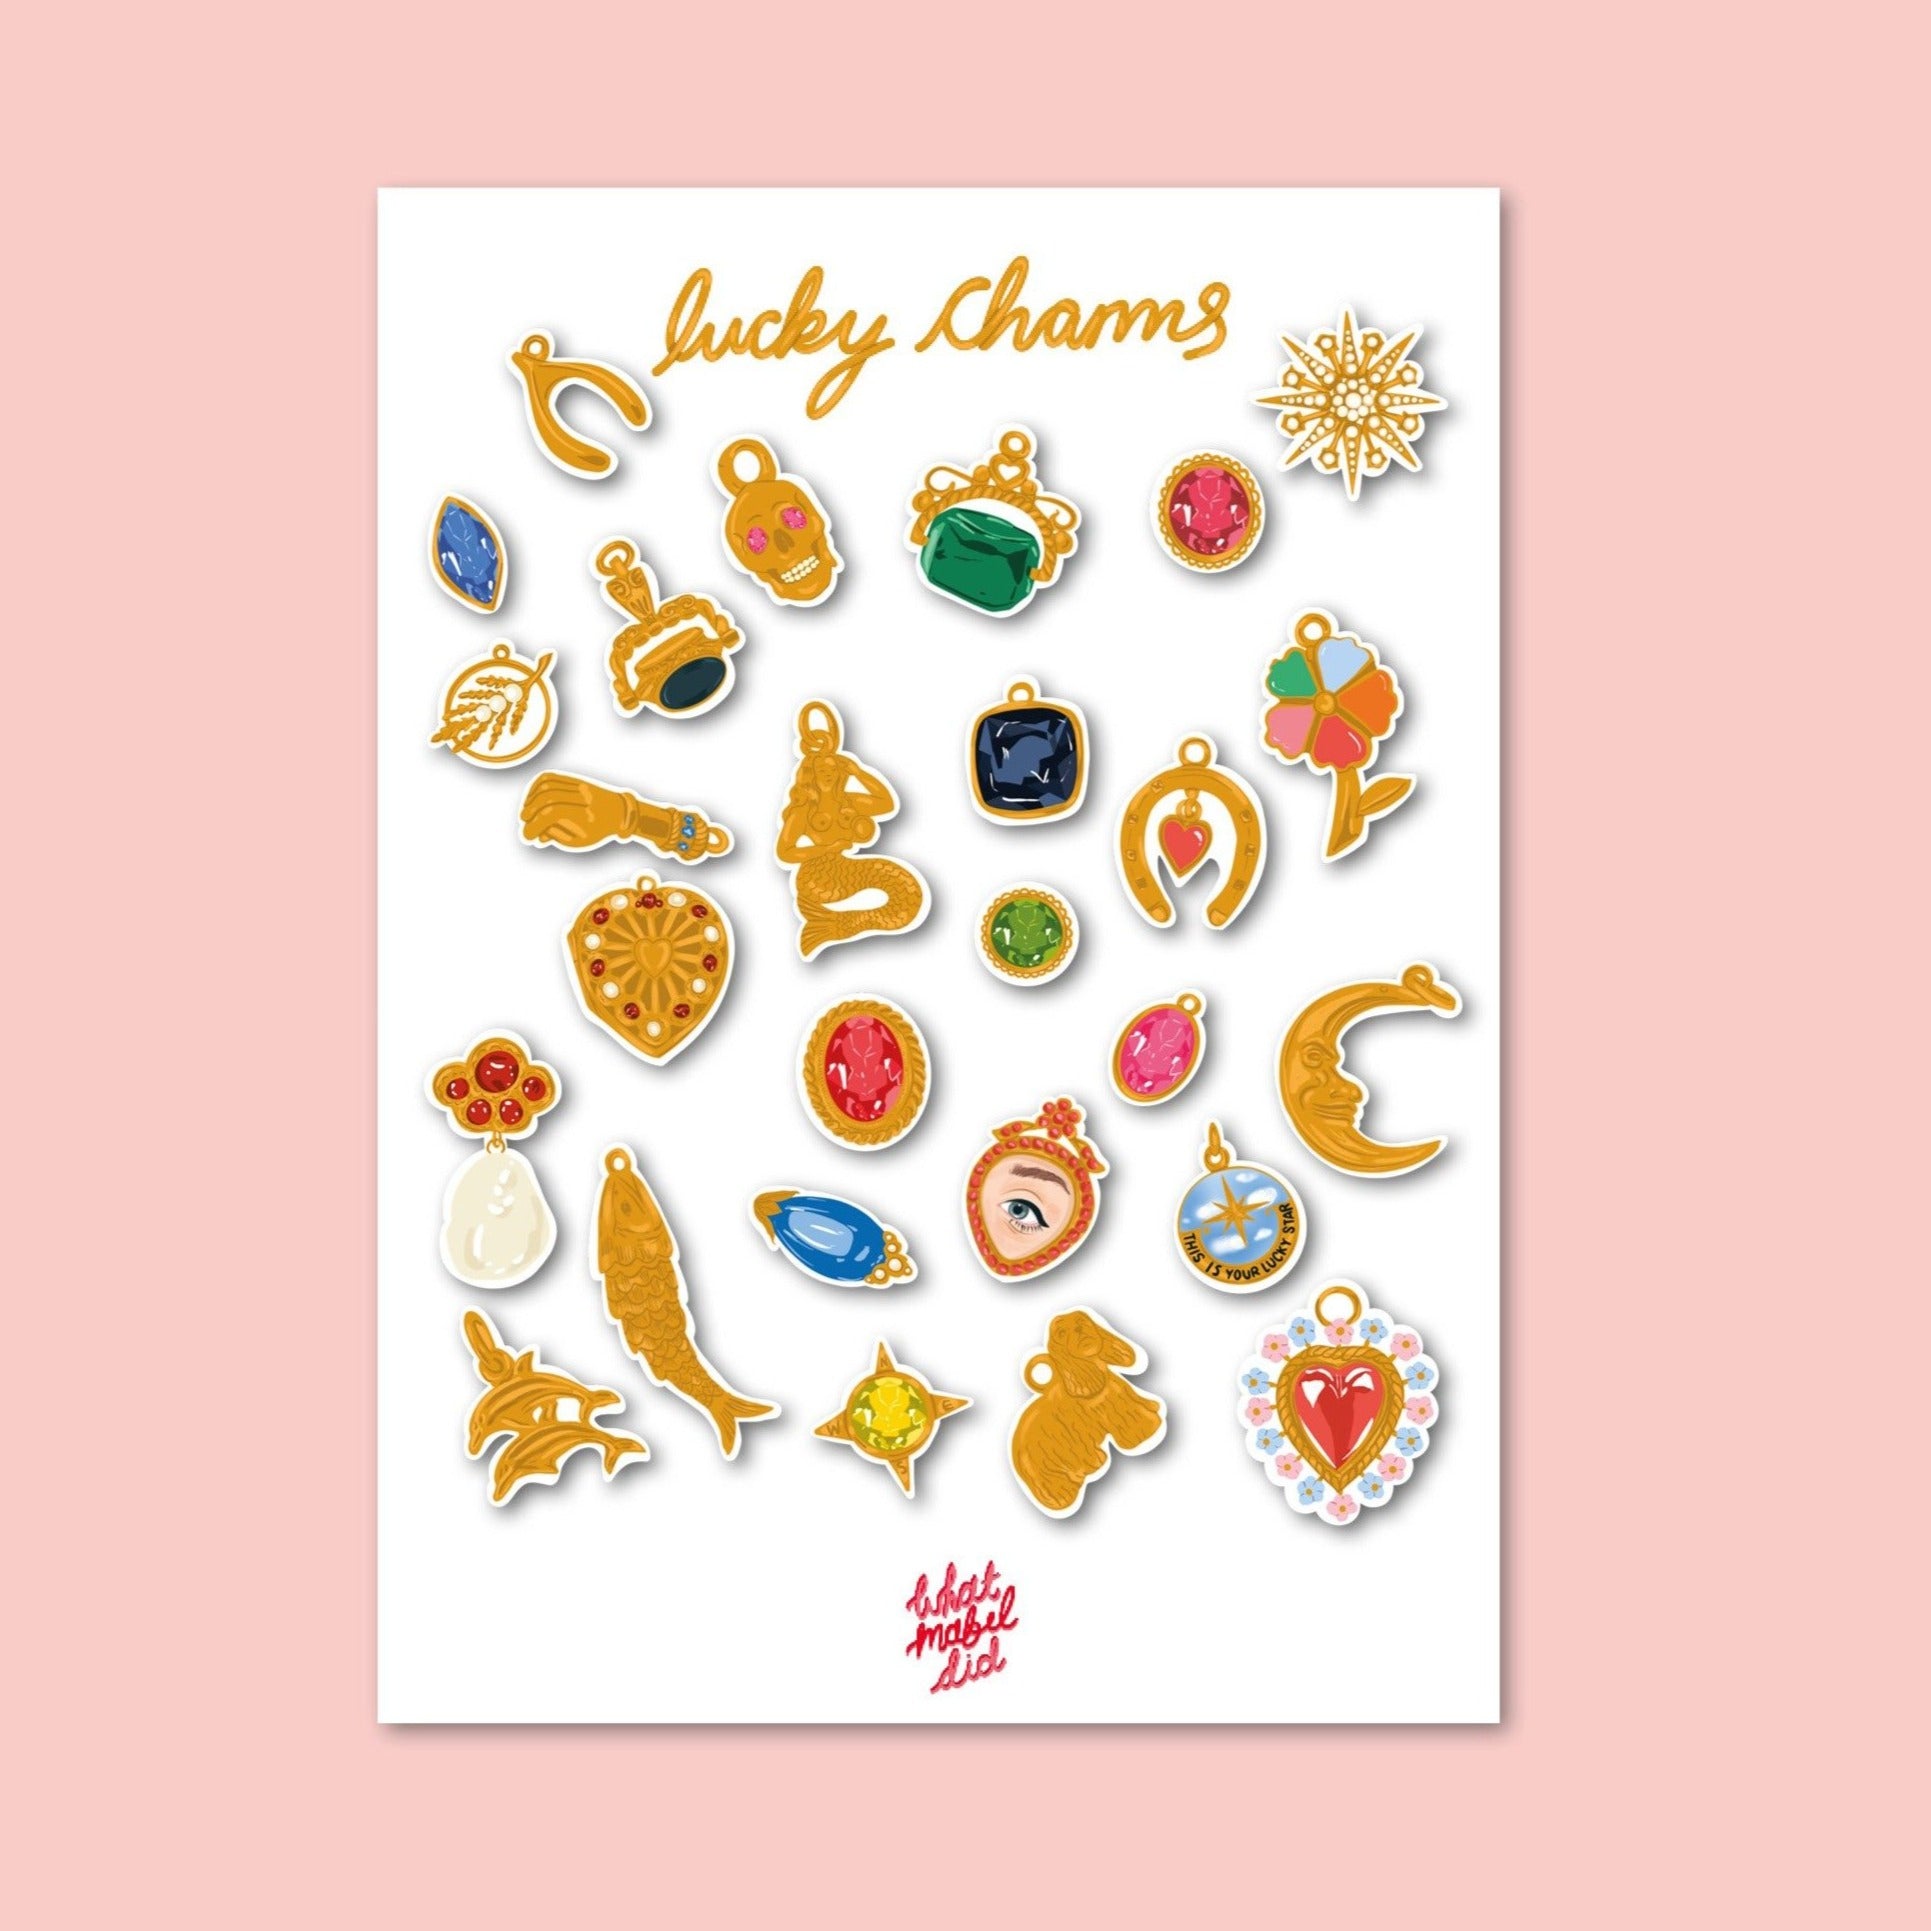 image of a sheet of kiss cut stickers featuring various vintage gold and jewelled charms